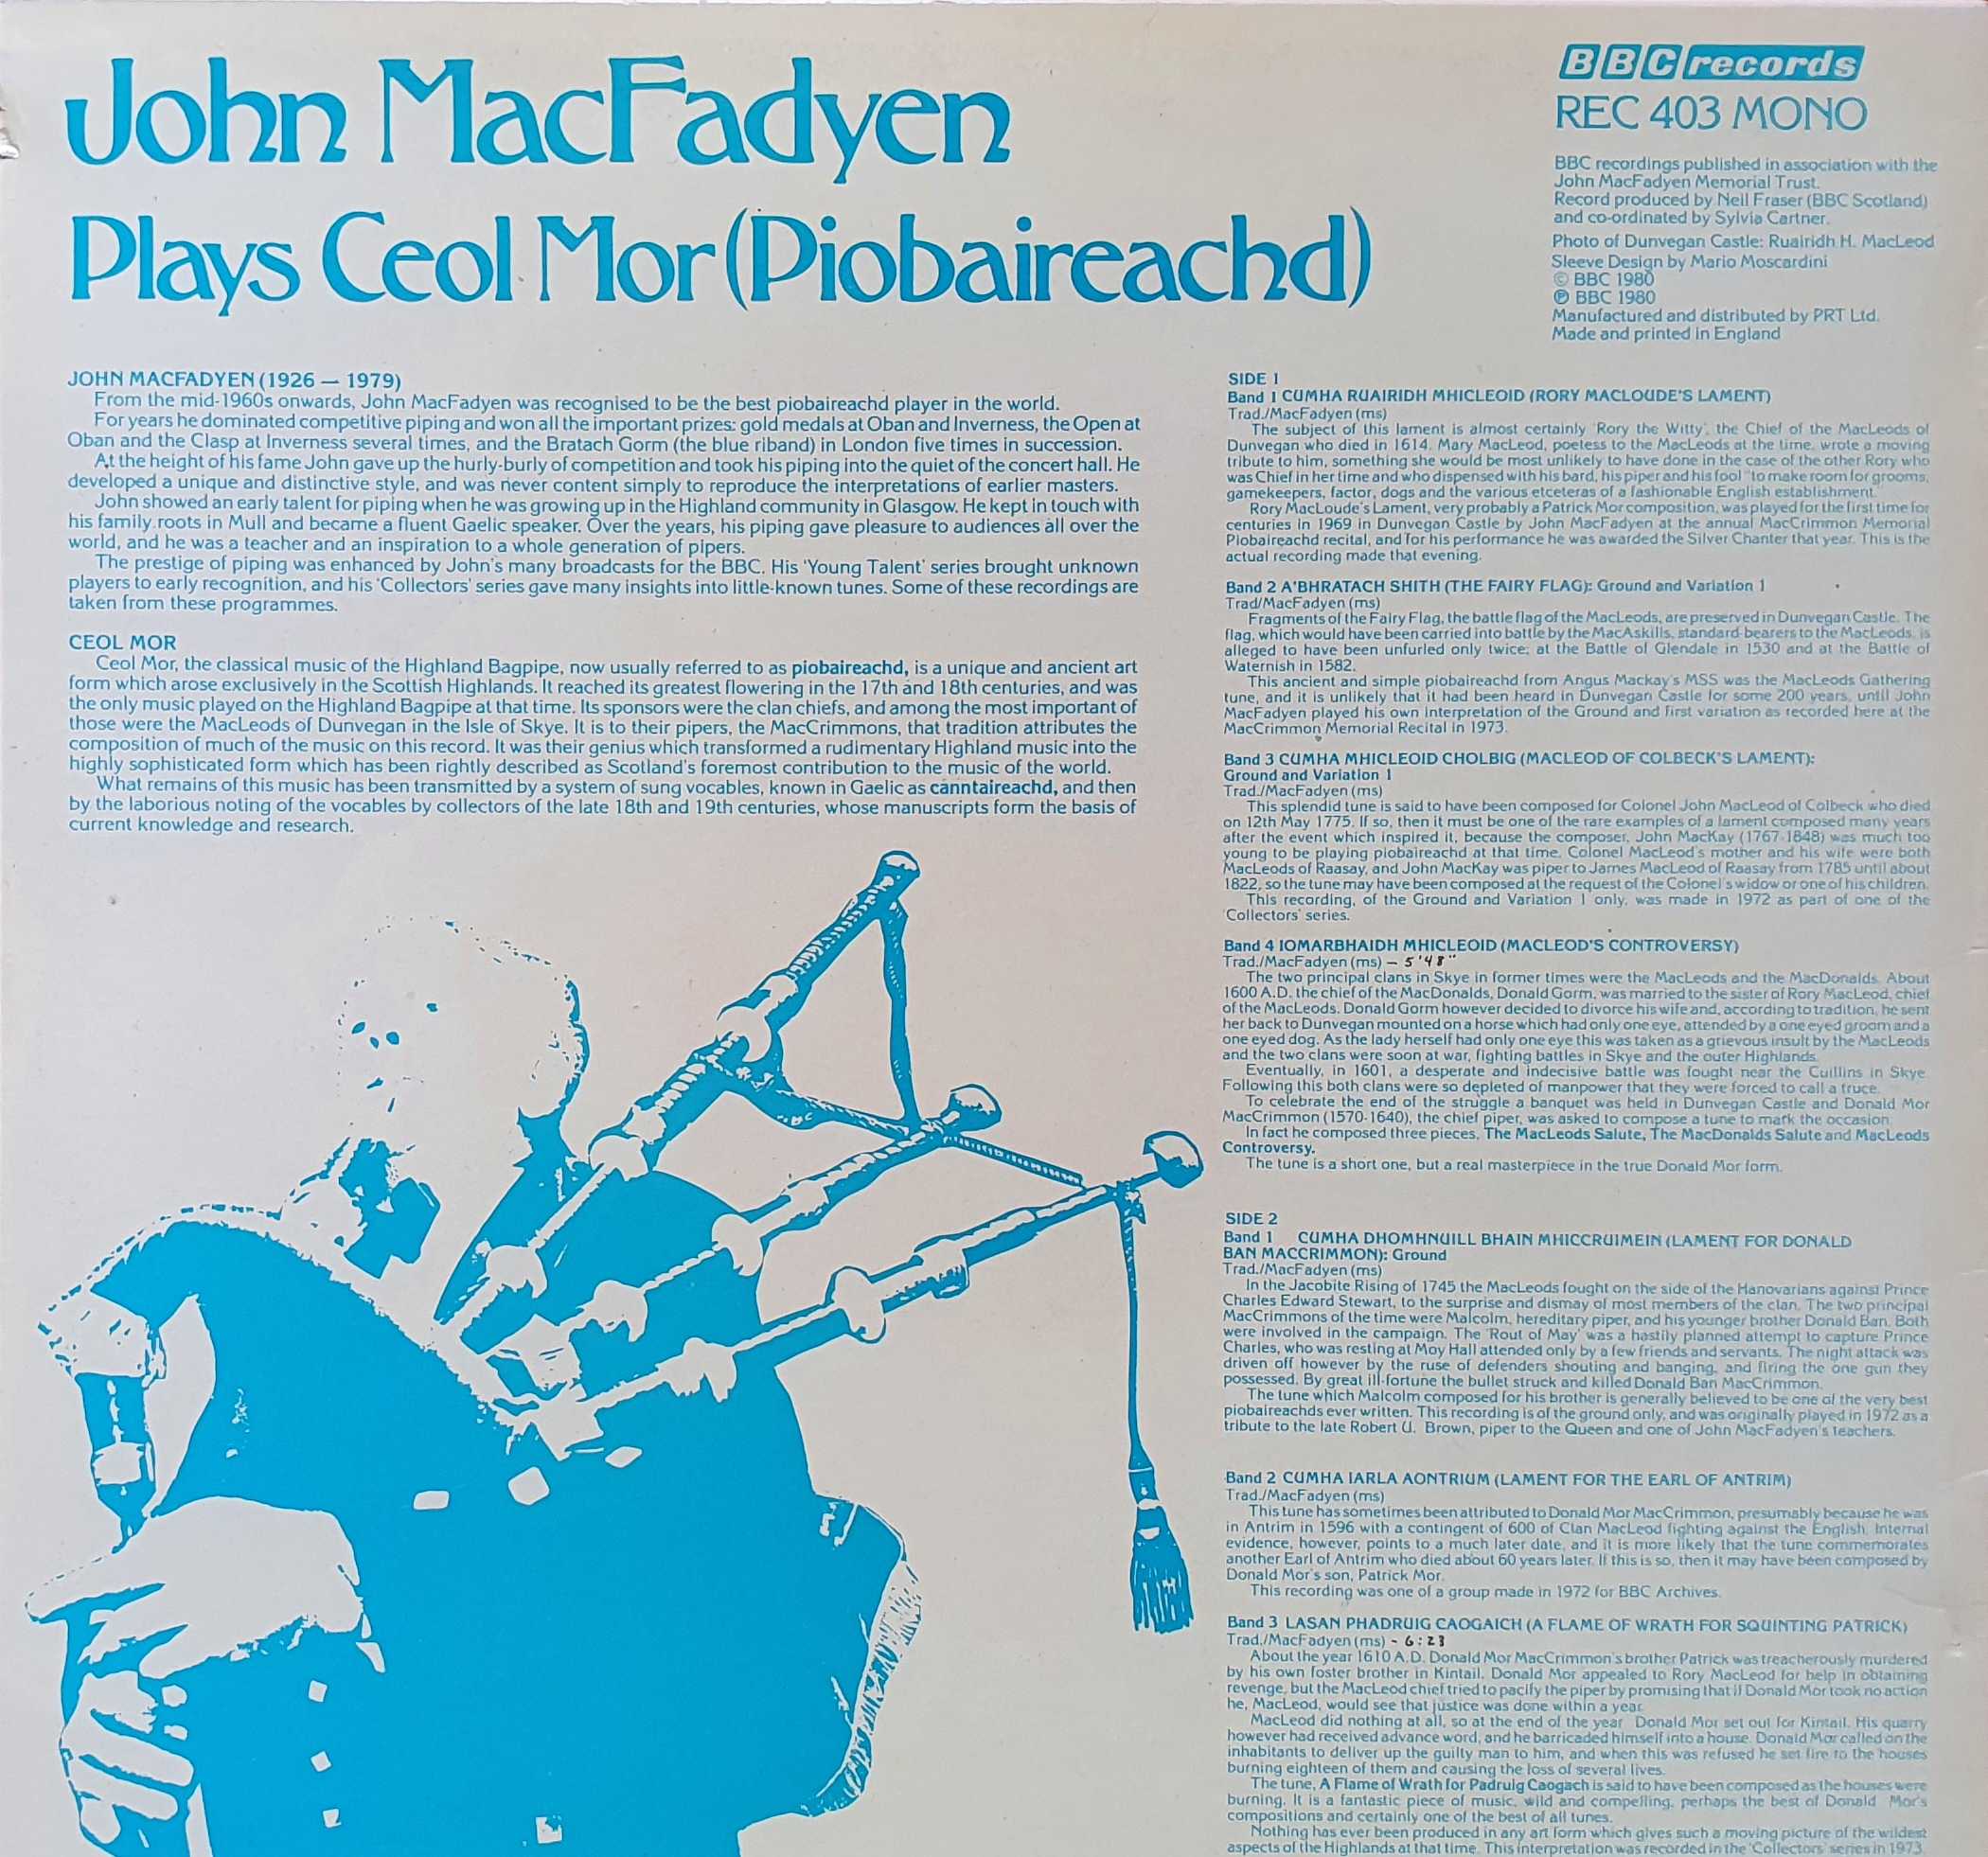 Picture of REC 403 John MacFadyen: Plays the Music of Dunvegan by artist John MacFadyen from the BBC records and Tapes library